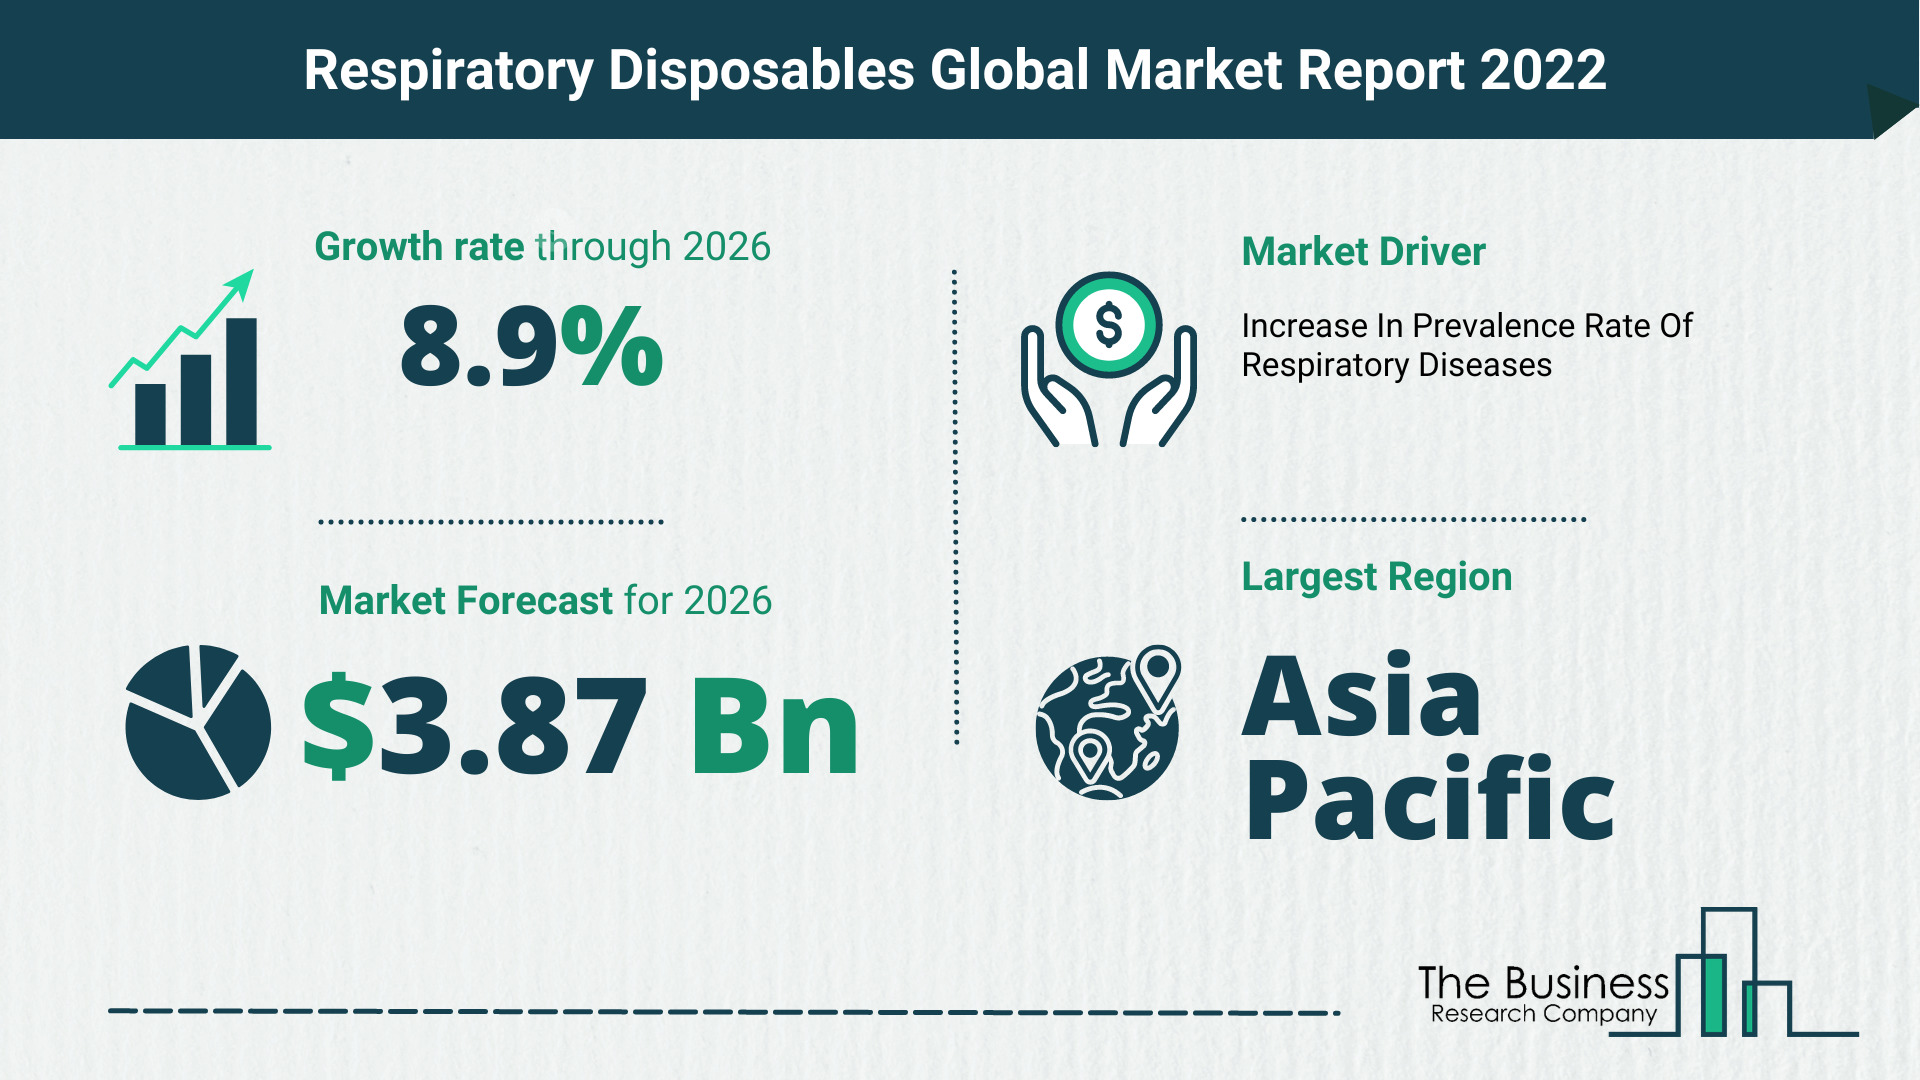 How Will The Respiratory Disposables Market Grow In 2022?